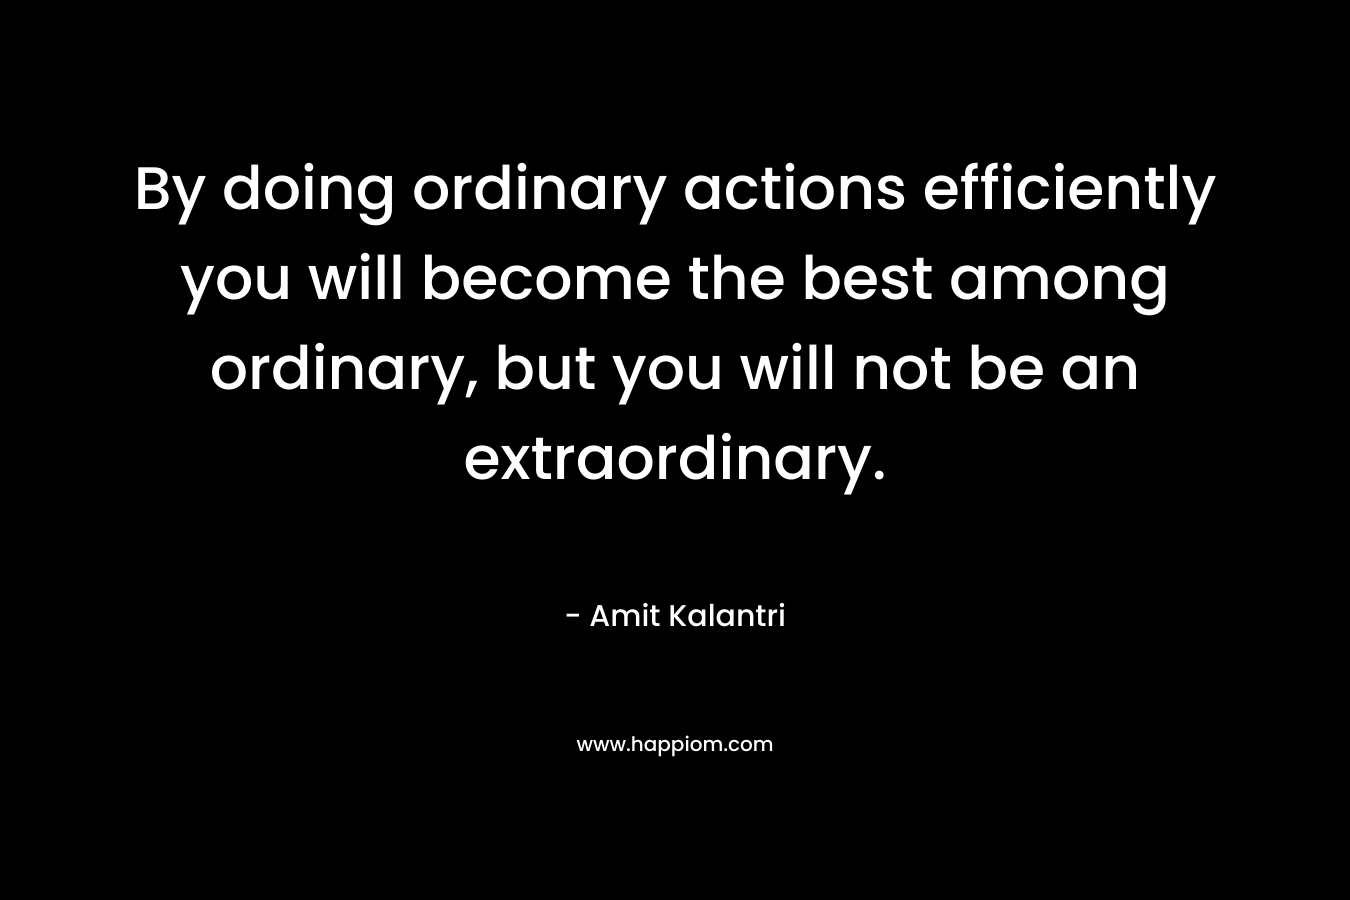 By doing ordinary actions efficiently you will become the best among ordinary, but you will not be an extraordinary.